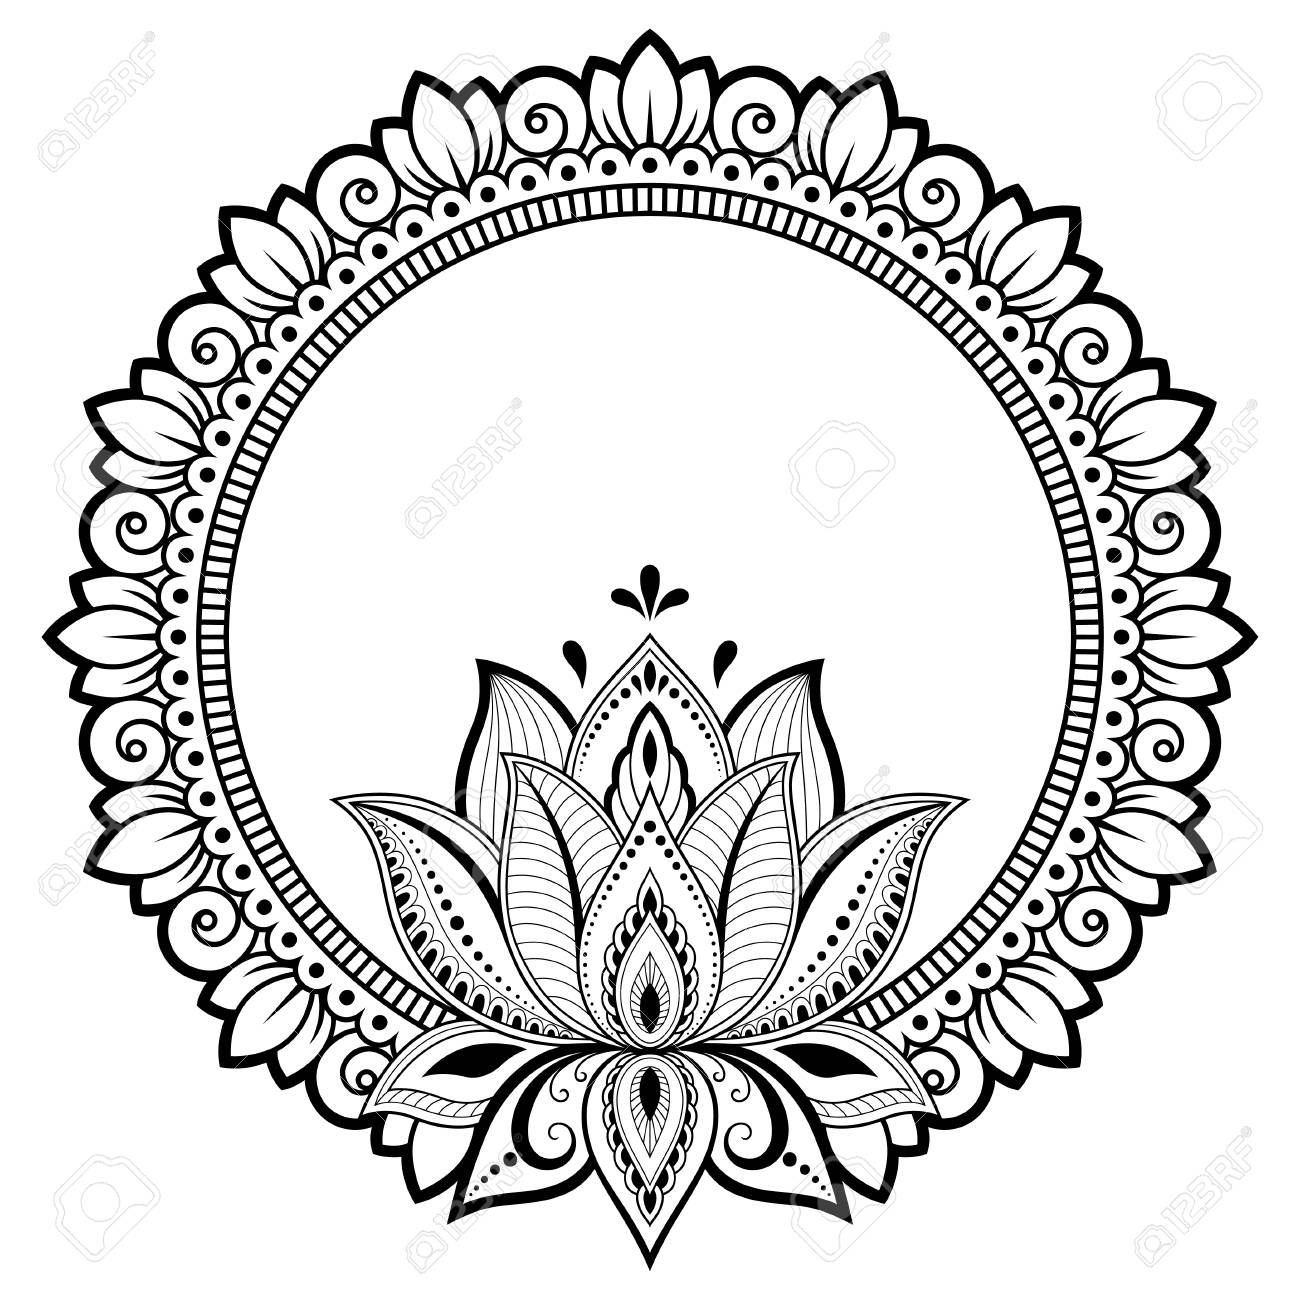 Circular pattern in form of mandala for henna mehndi tattoo decoration decorative frame with lotus flower ornament in ethnic oriental style coloring book page royalty free svg cliparts vectors and stock illustration